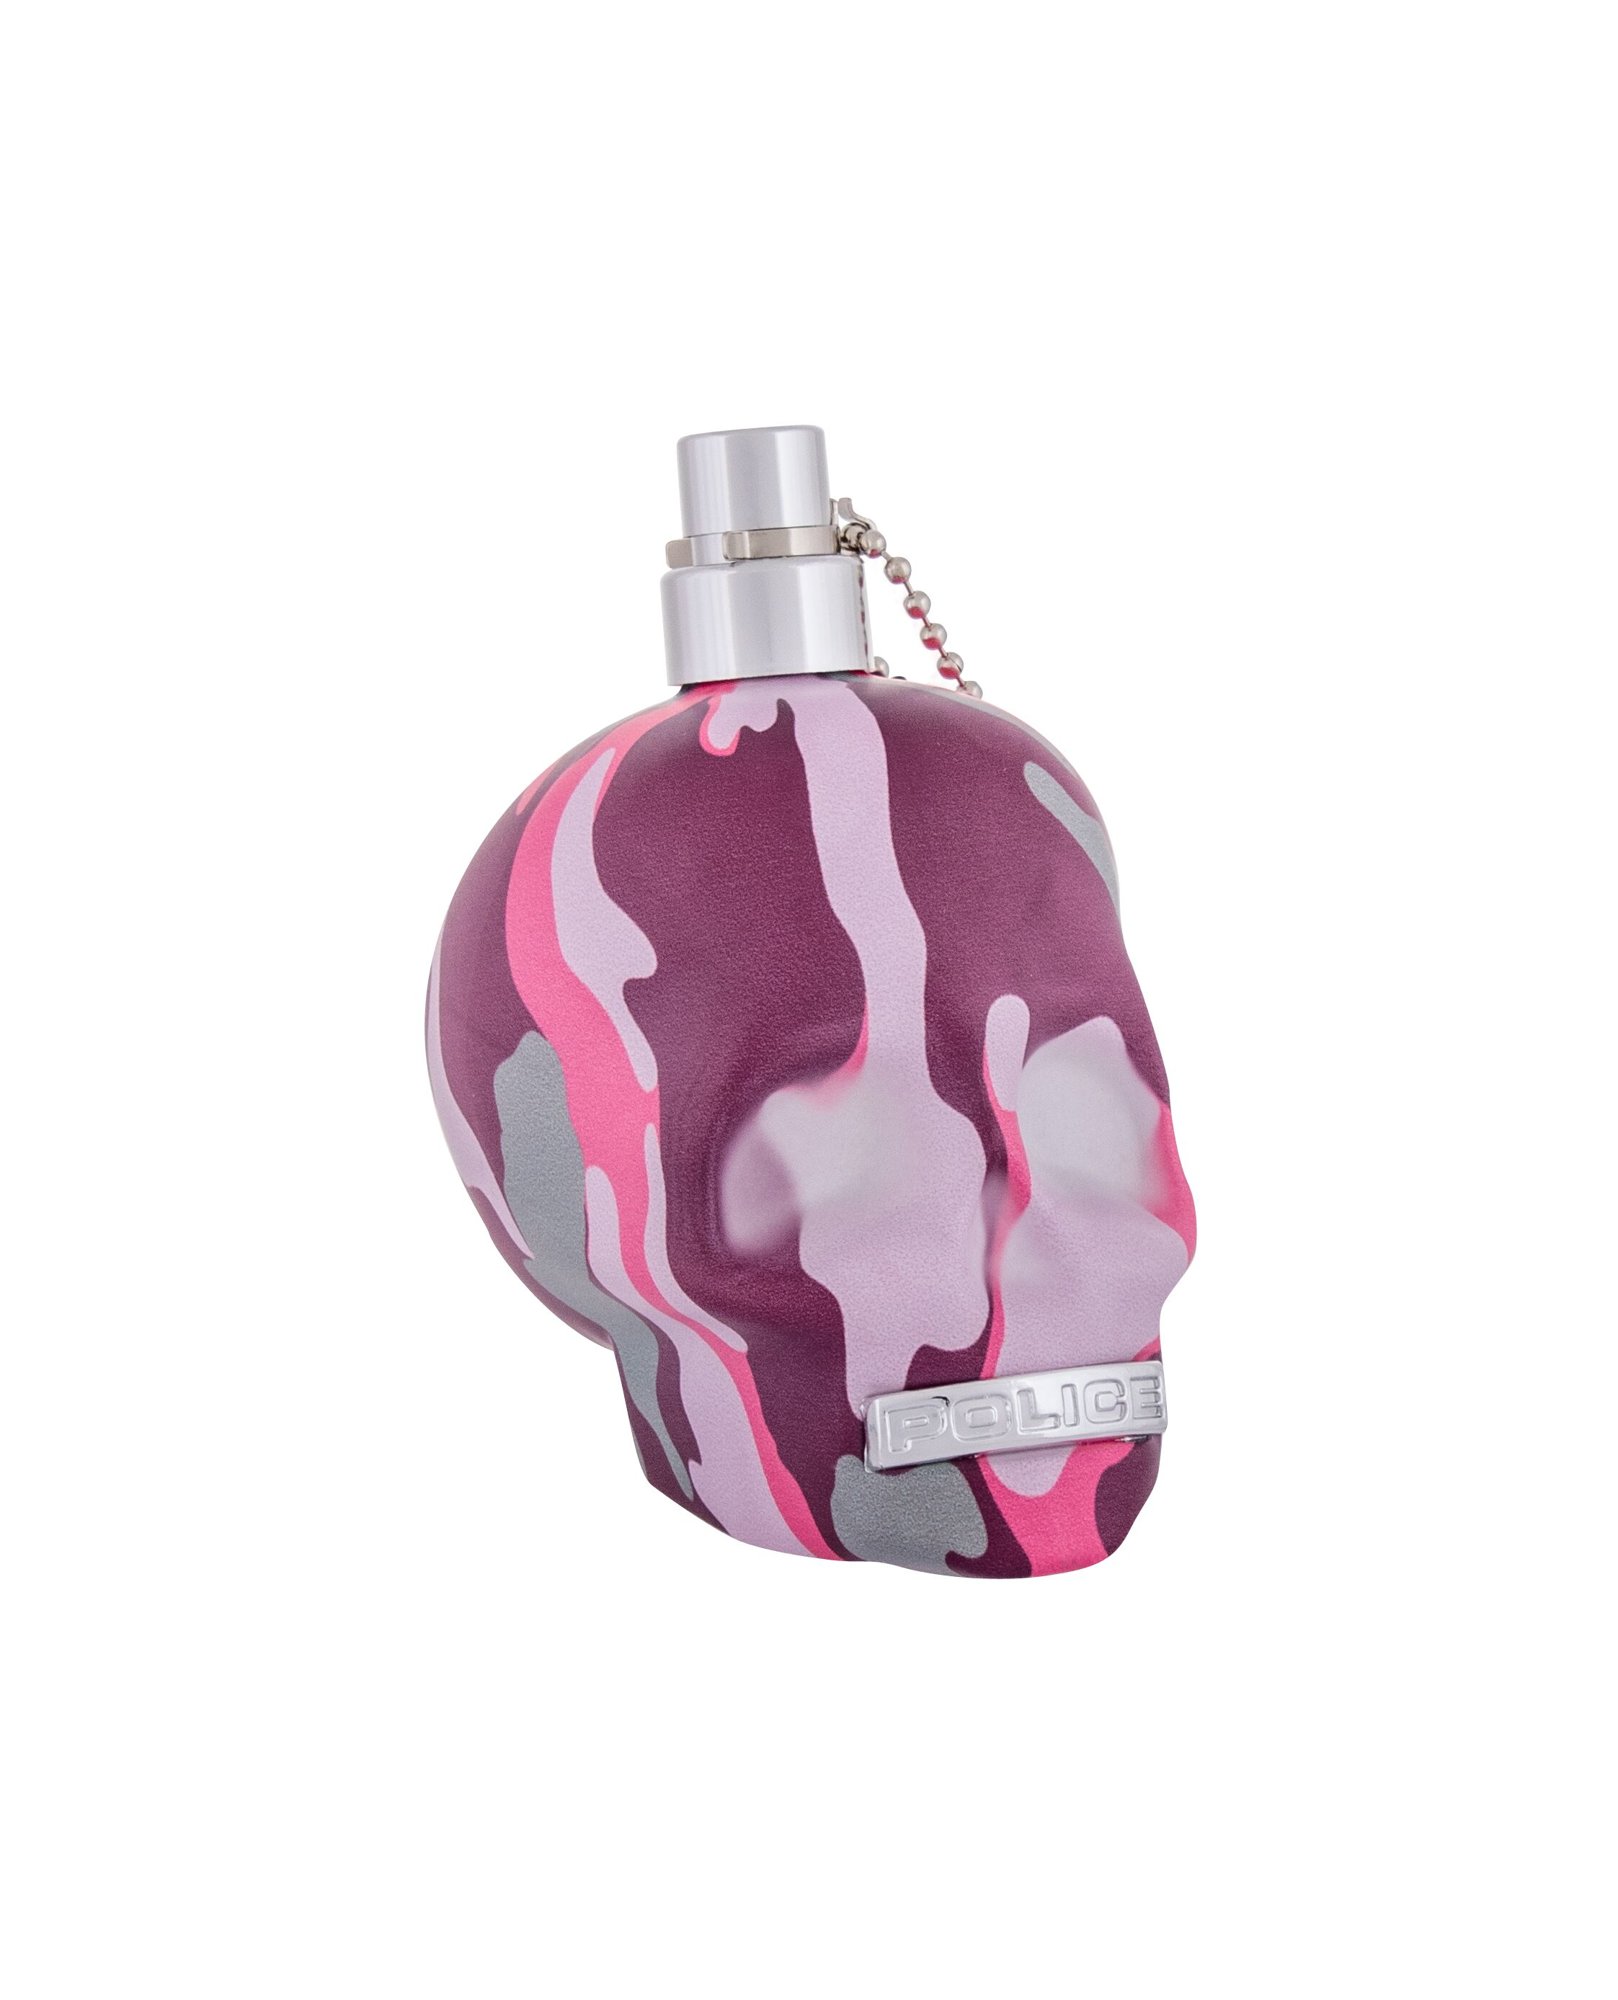 Police To Be Camouflage Pink, edp 75ml